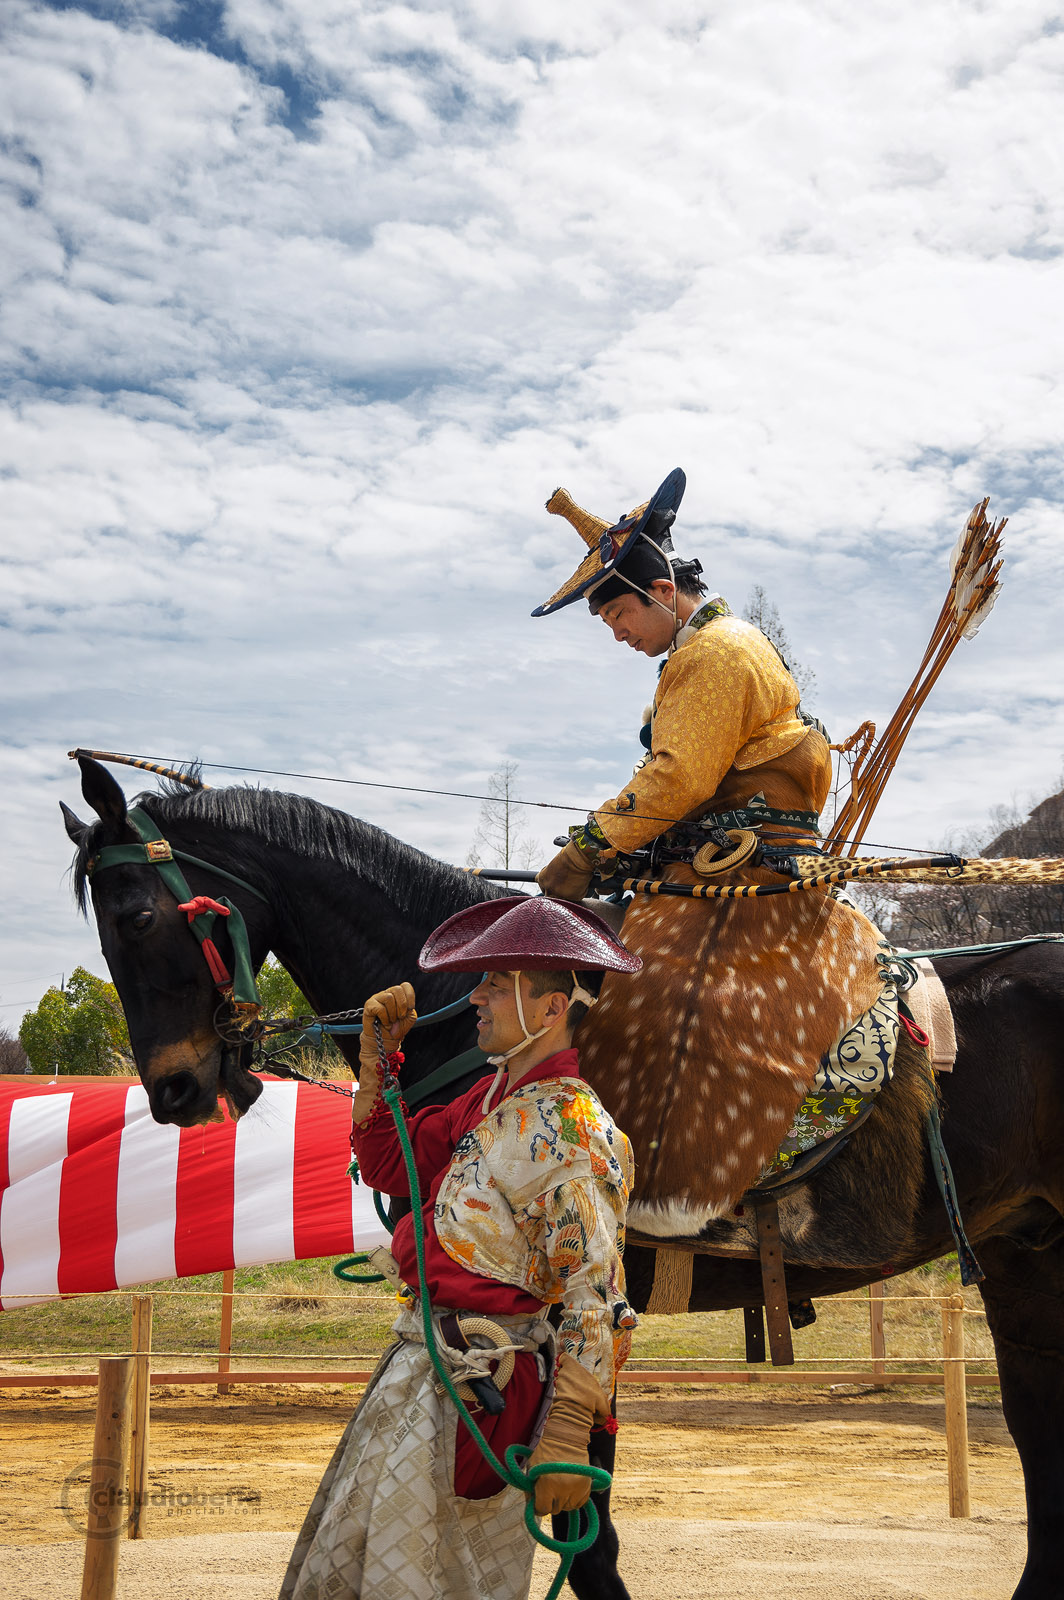 Japan, Yabusame, Traditional mounted archery, Relaxation time for archer and horse